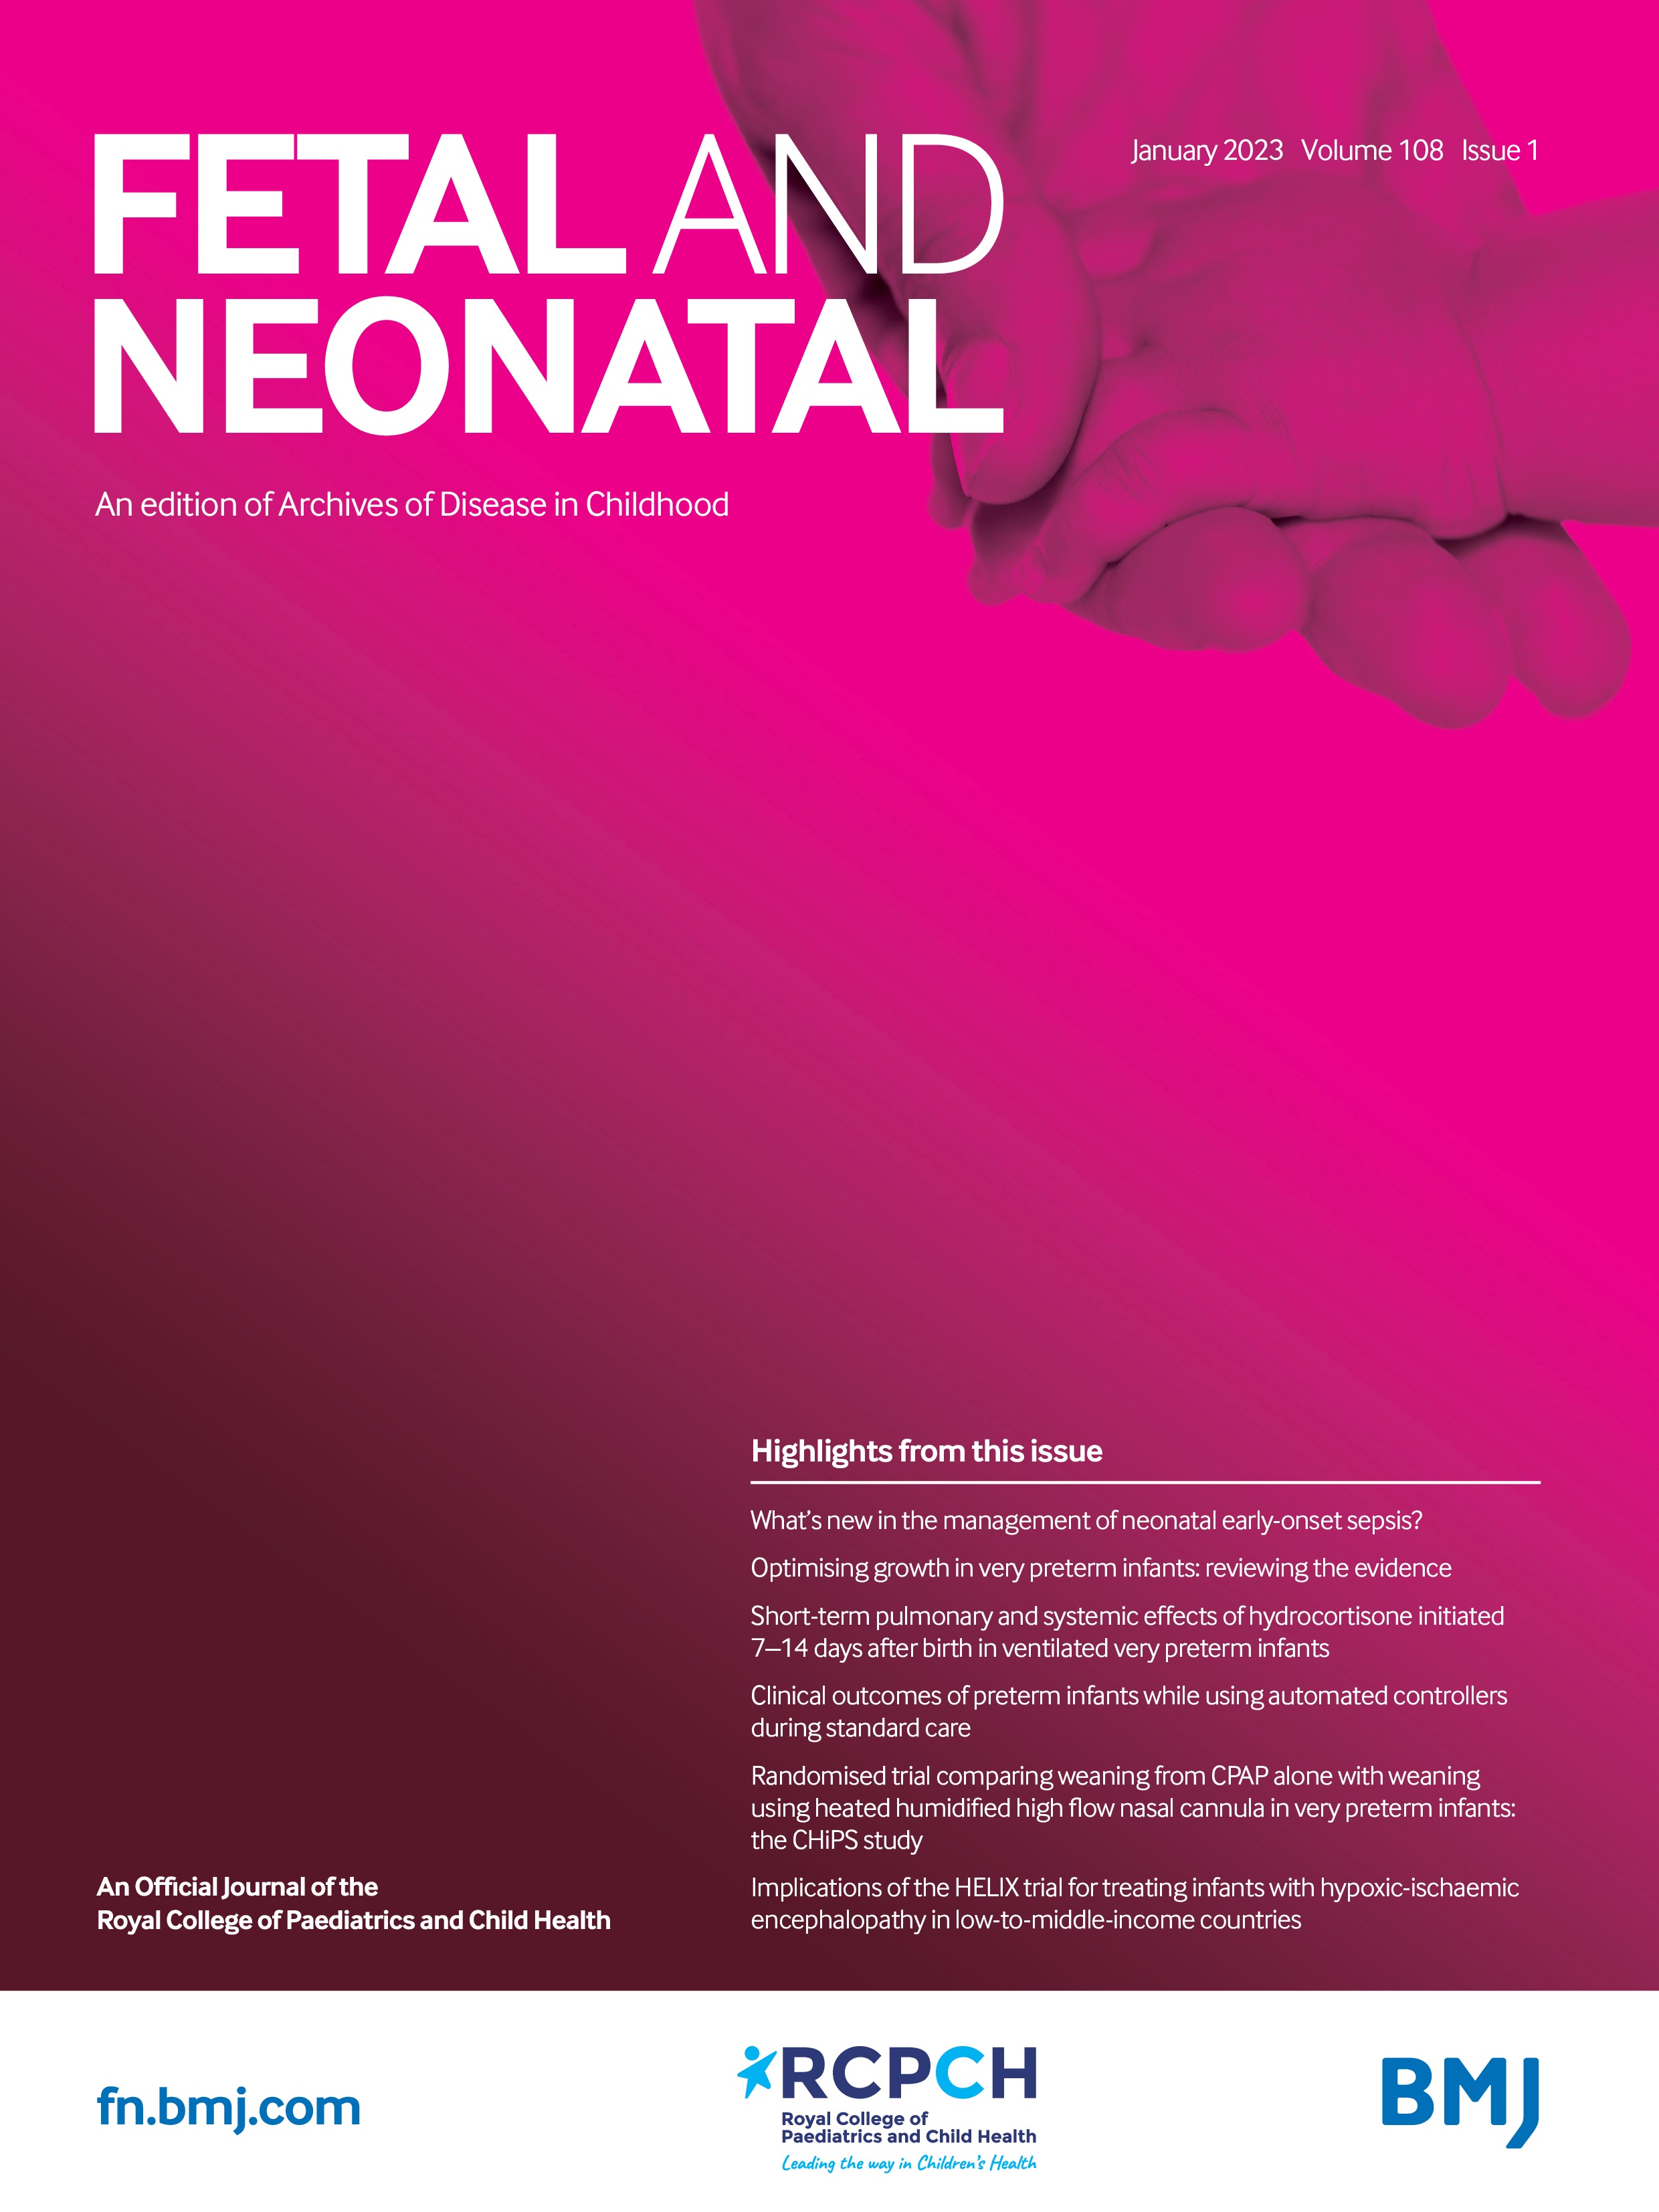 Feasibility of and experience using a portable MRI scanner in the neonatal intensive care unit